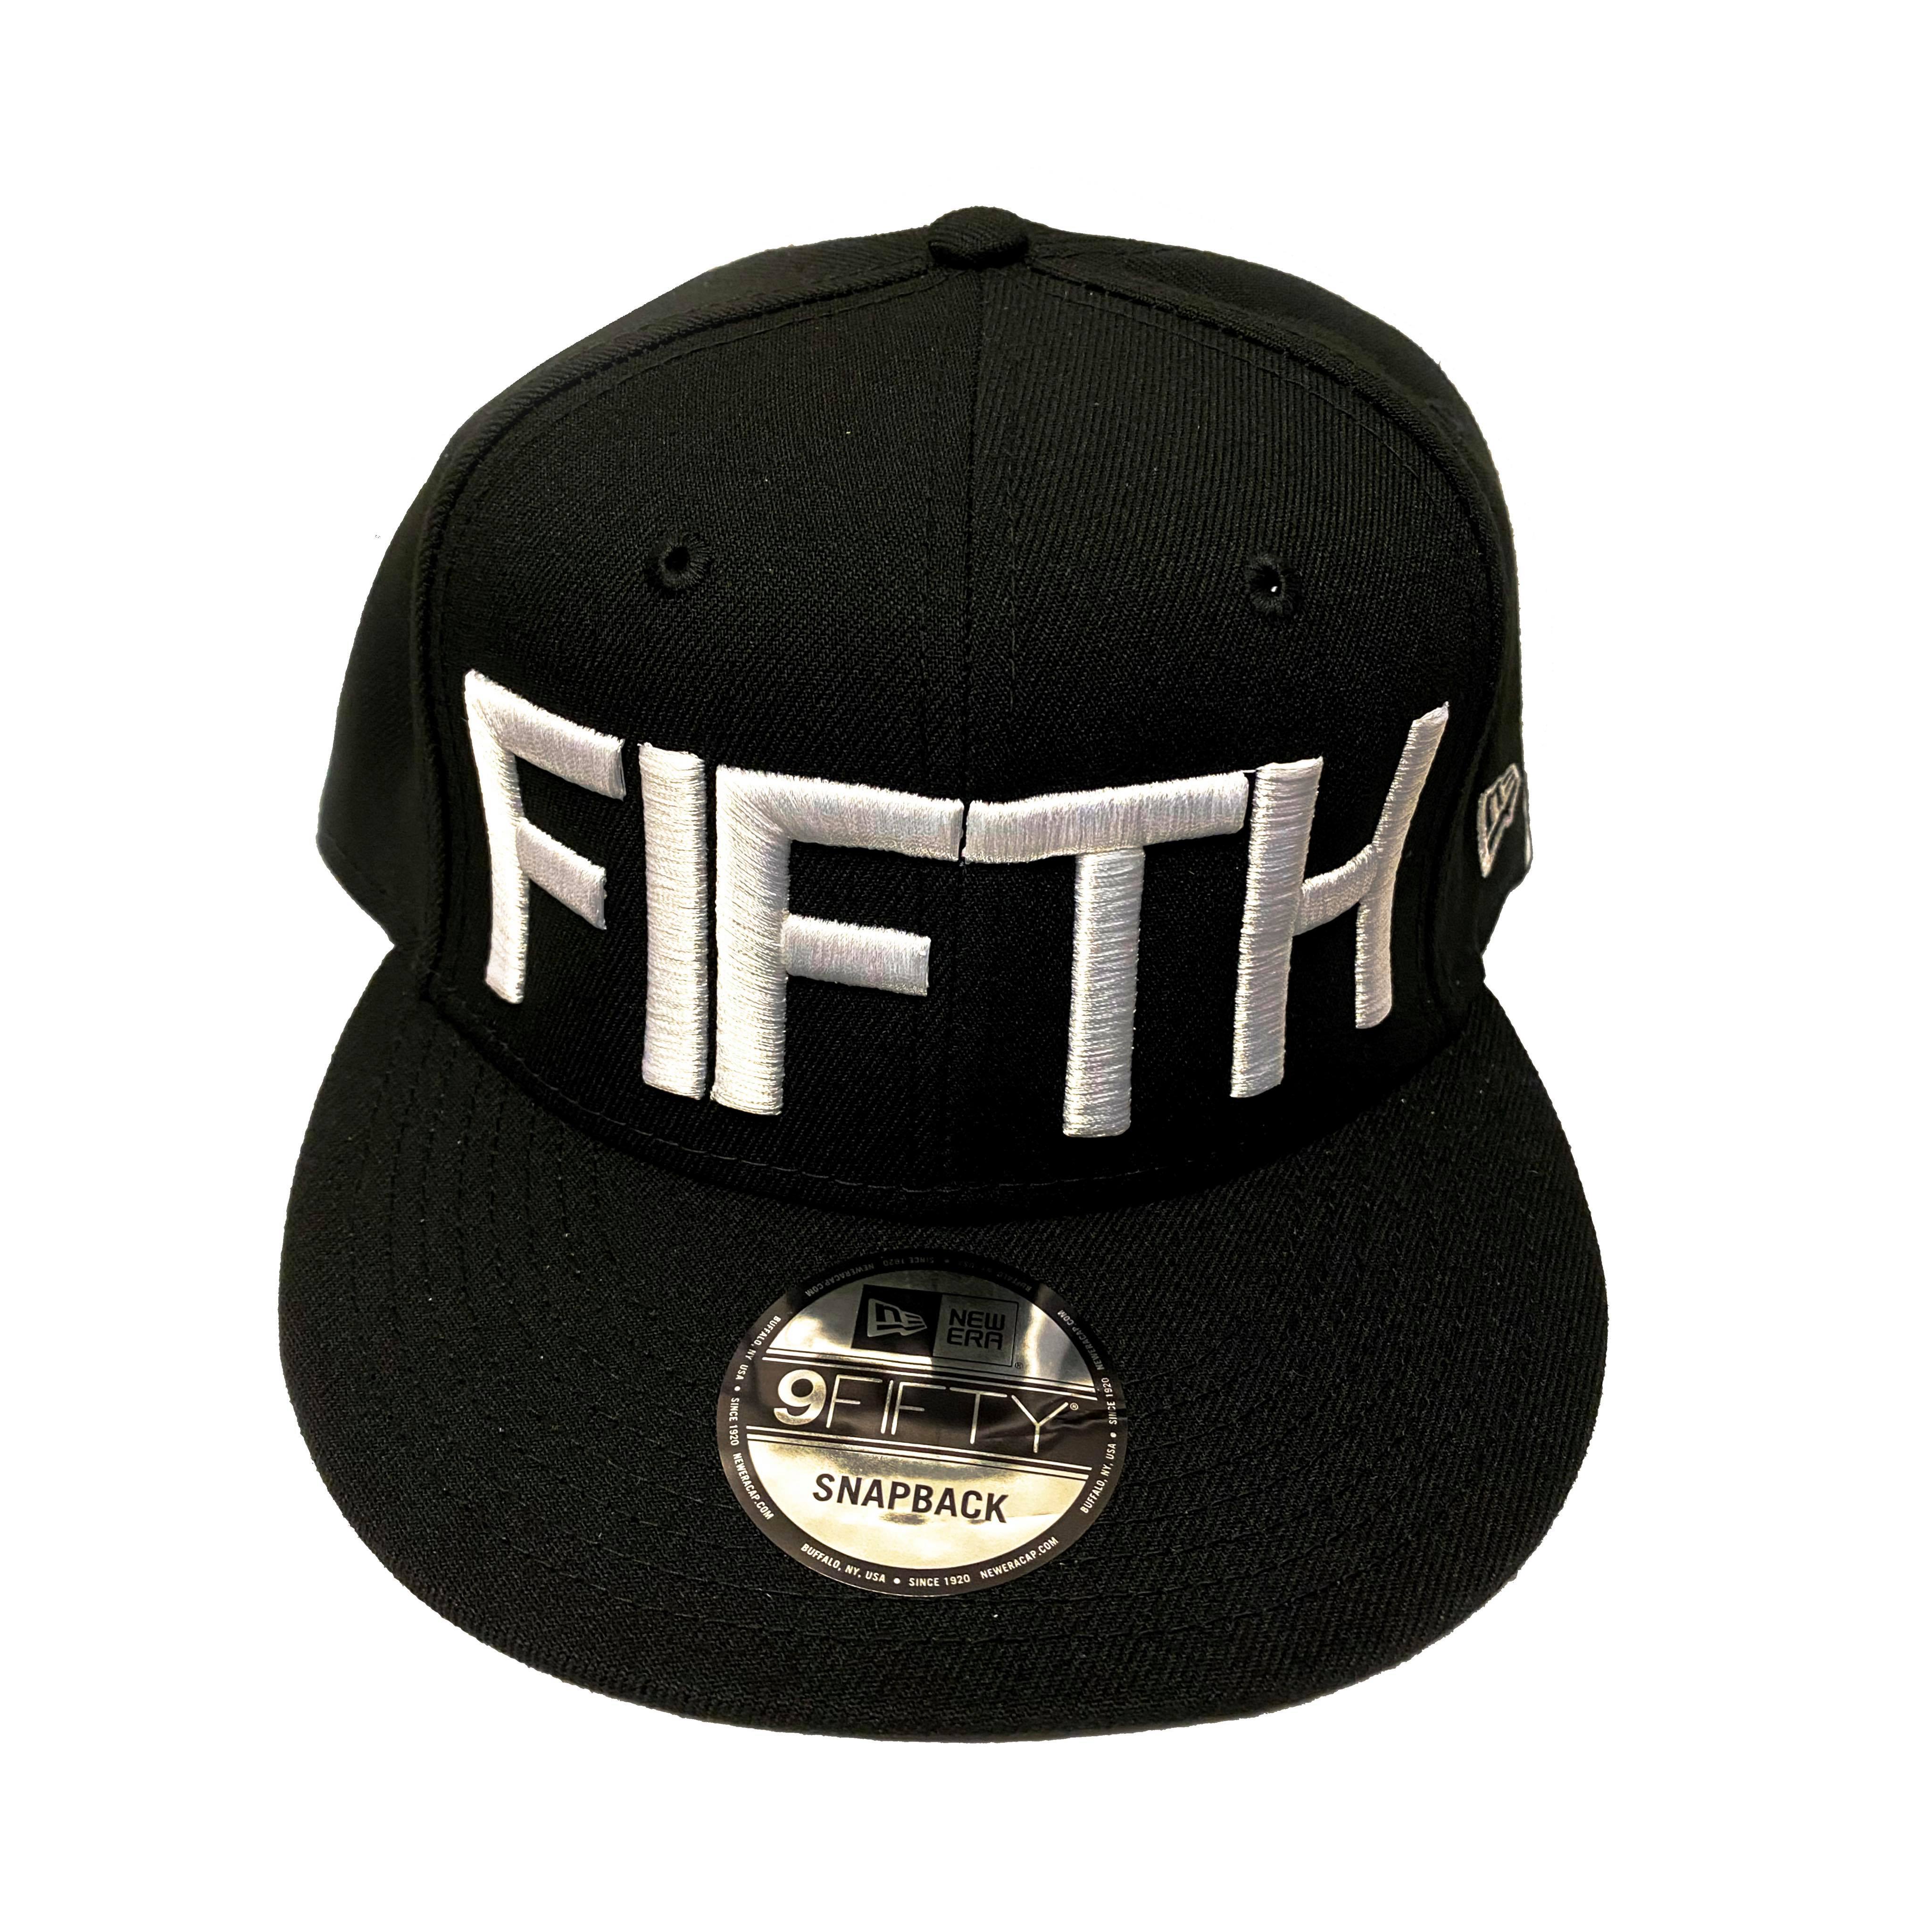 FIFTH Hat